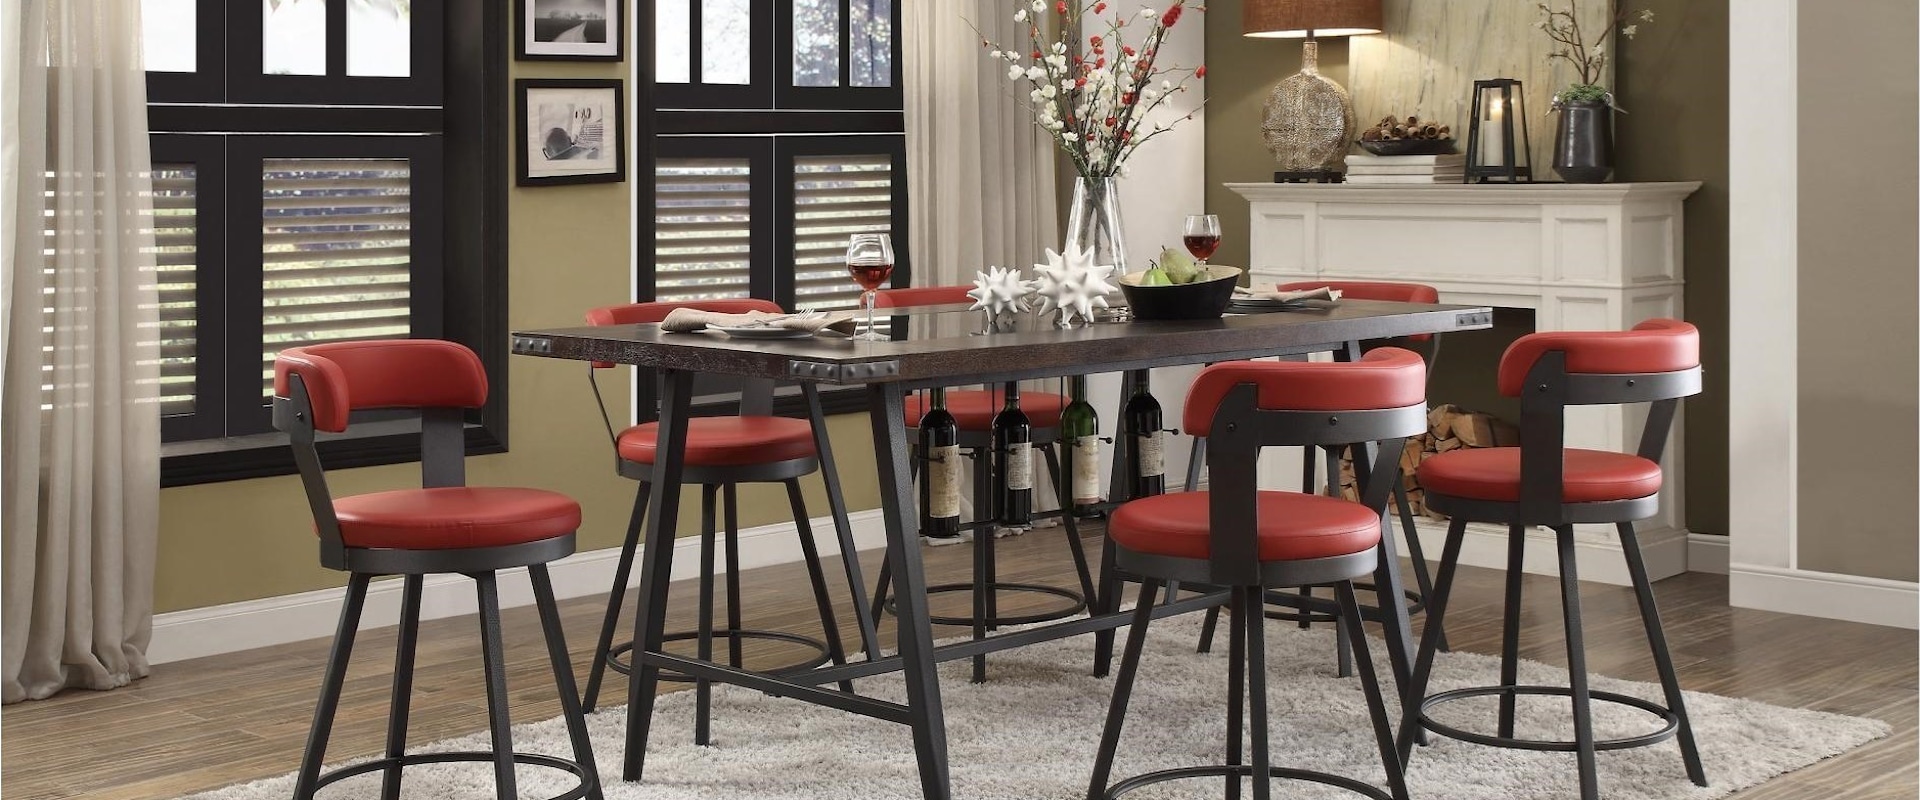 Industrial 7 Piece Dining Set with Built In Wine Rack